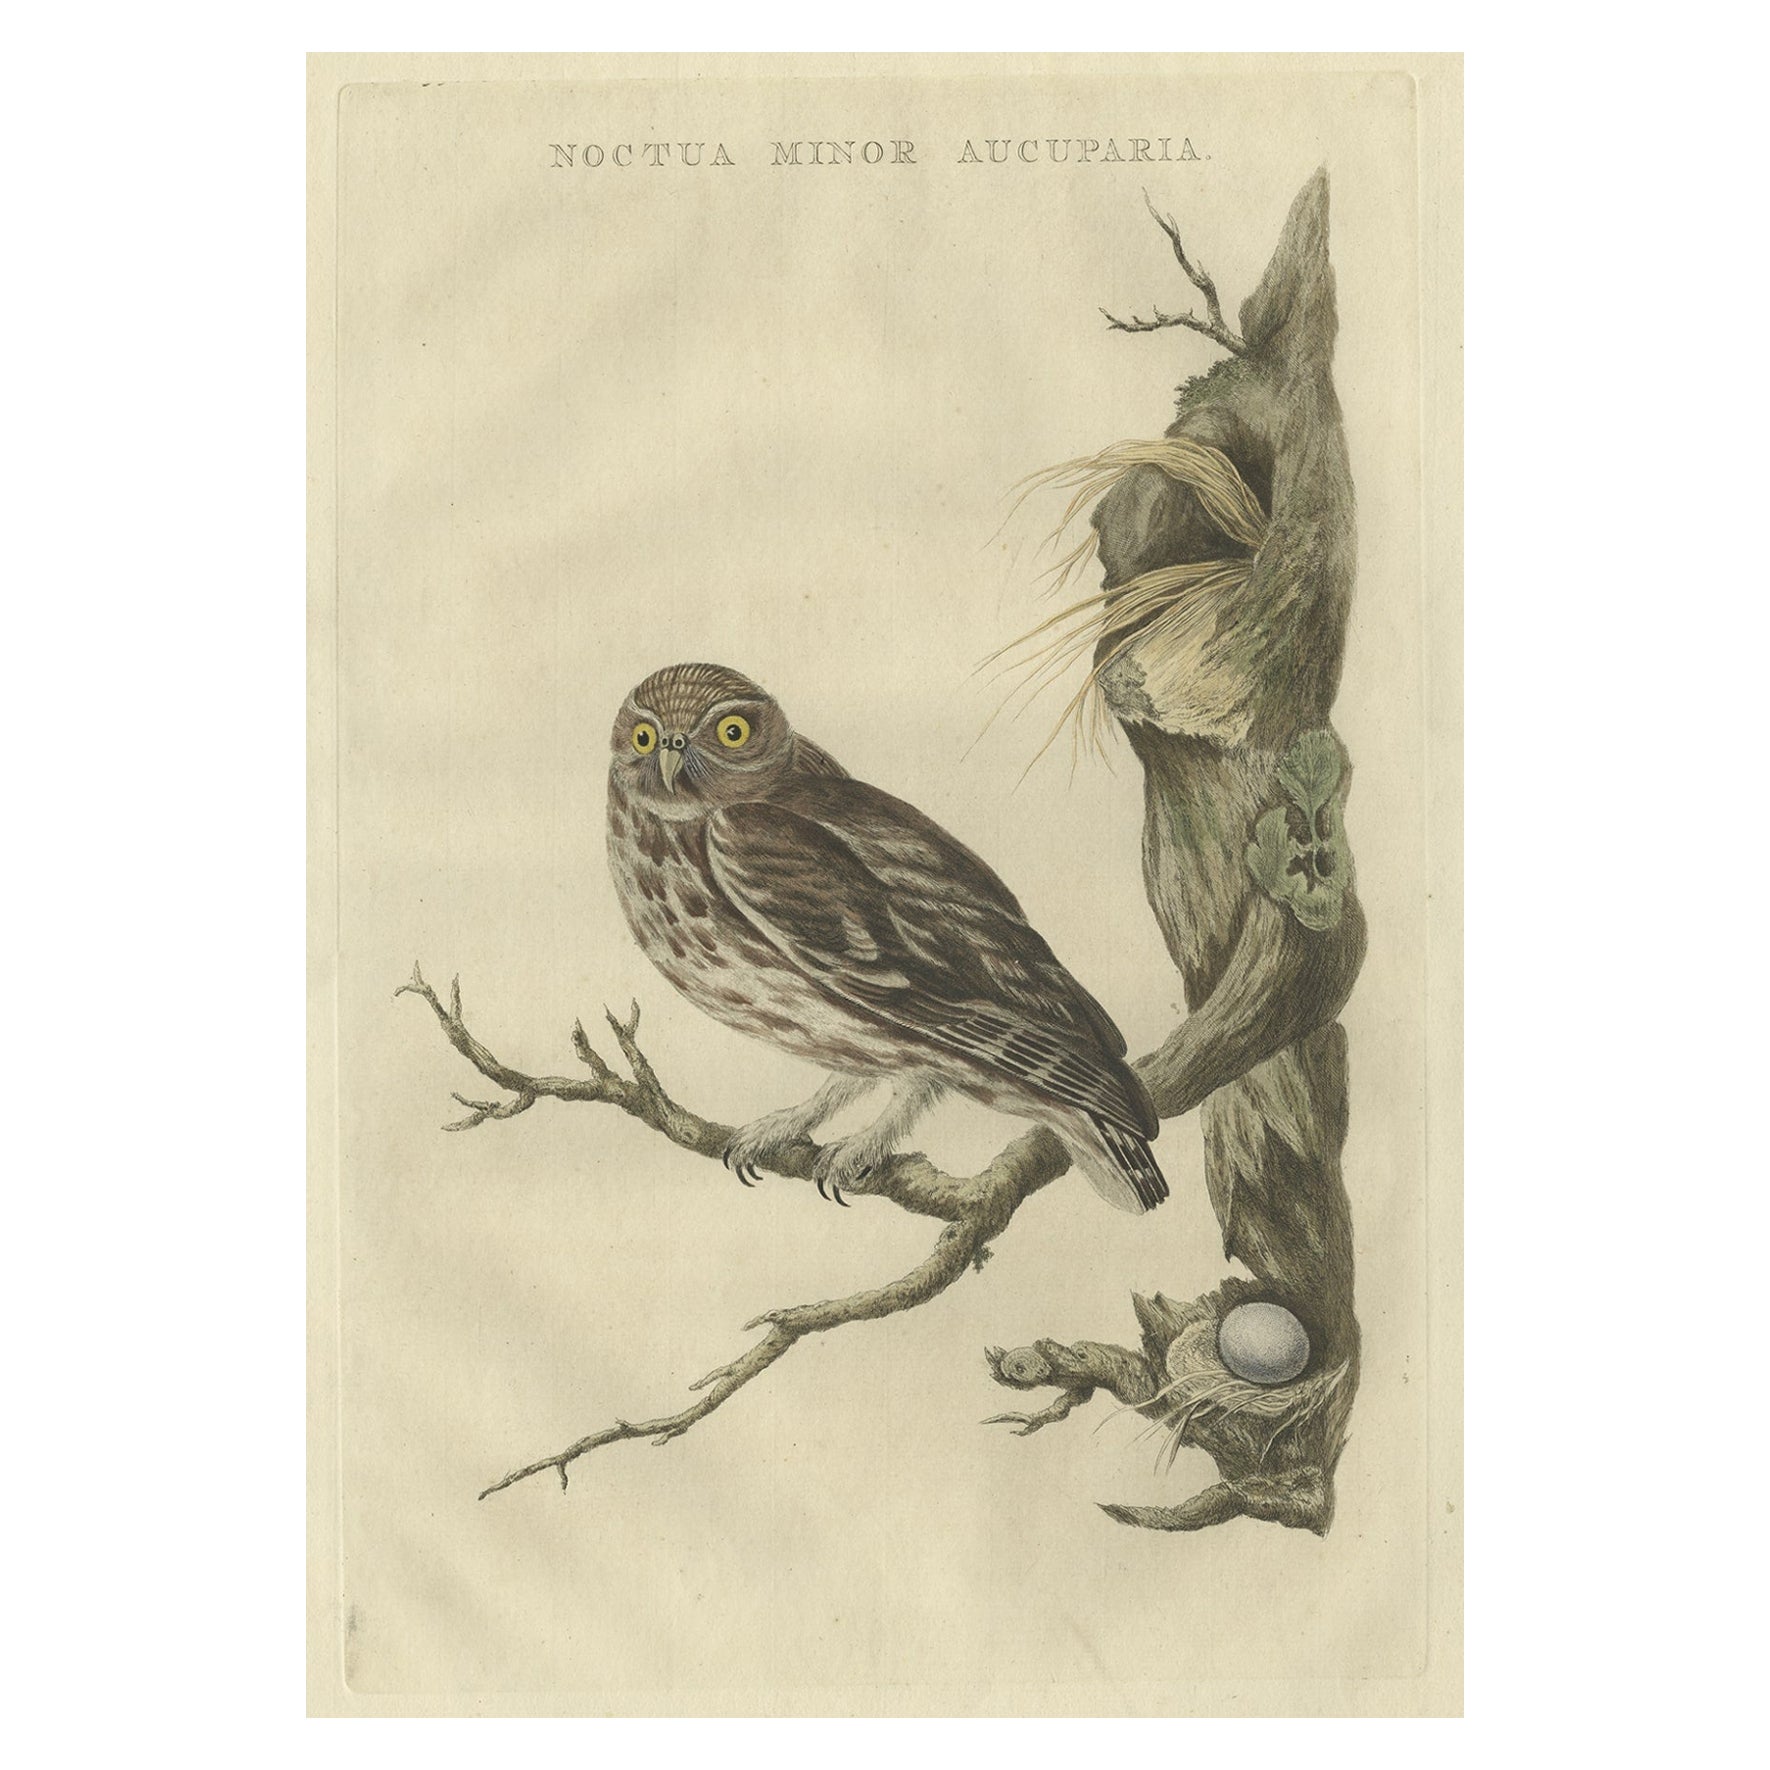 Antique 18th Century Engraving in Old Handcoloring of a Little Owl, 1770